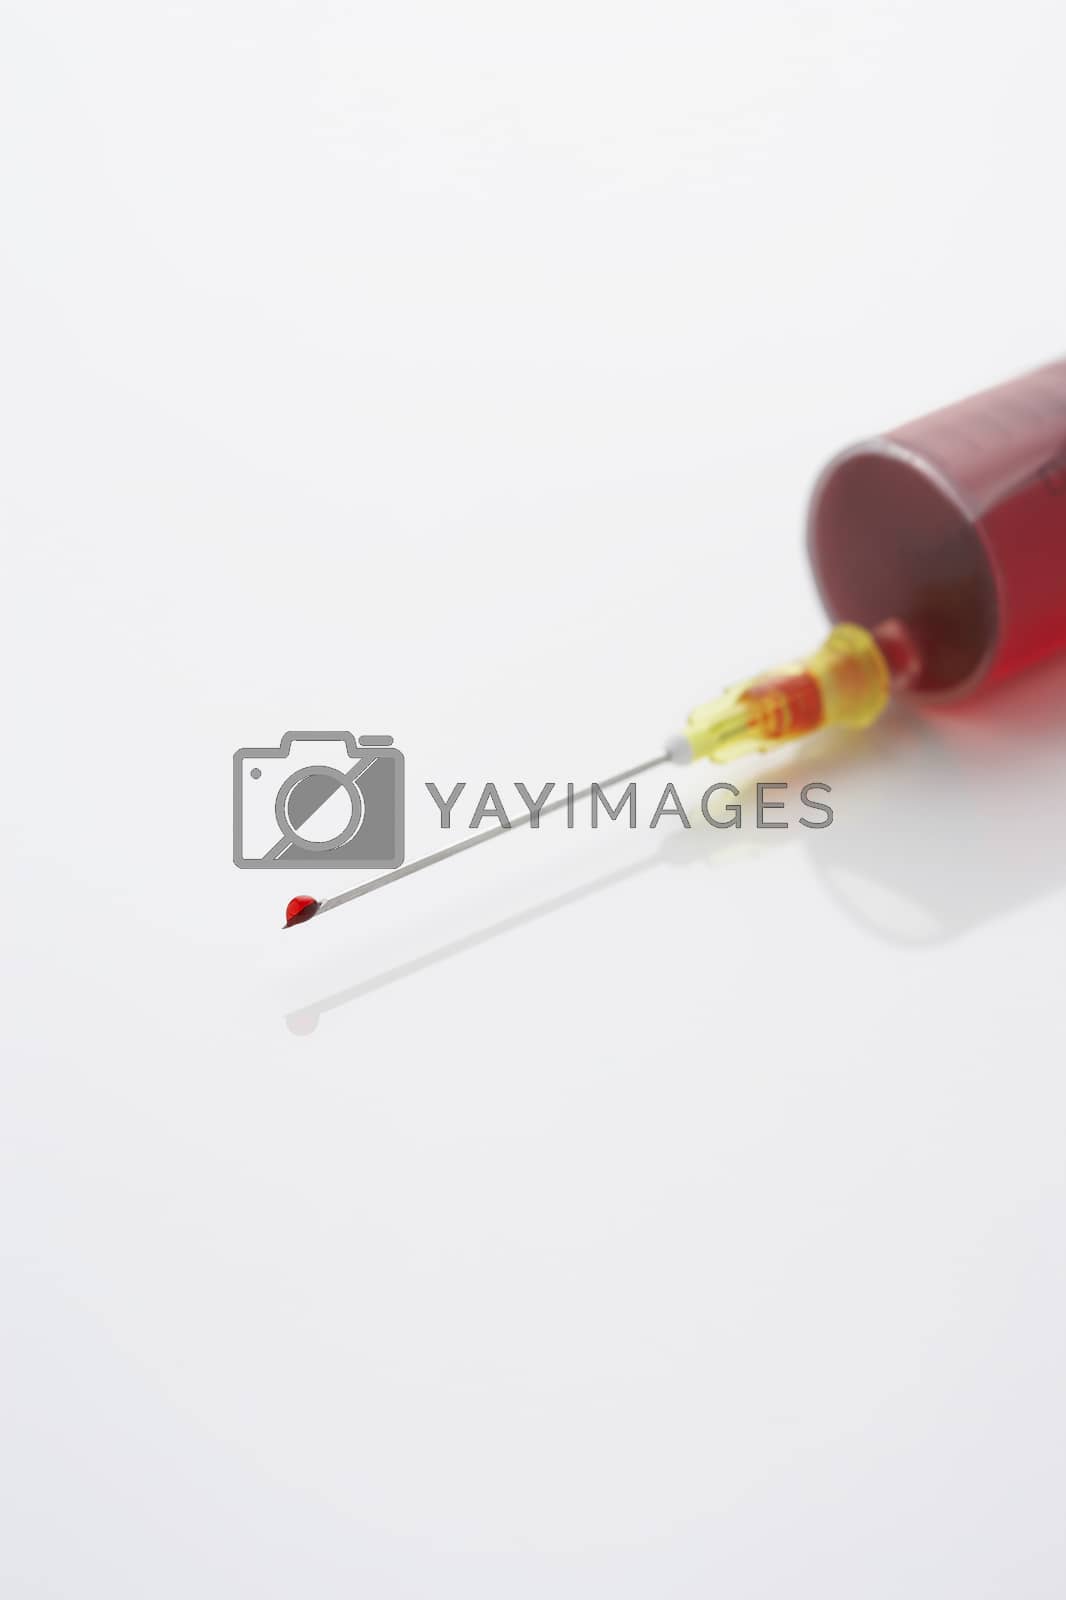 Royalty free image of Syringe filled with blood close-up by moodboard